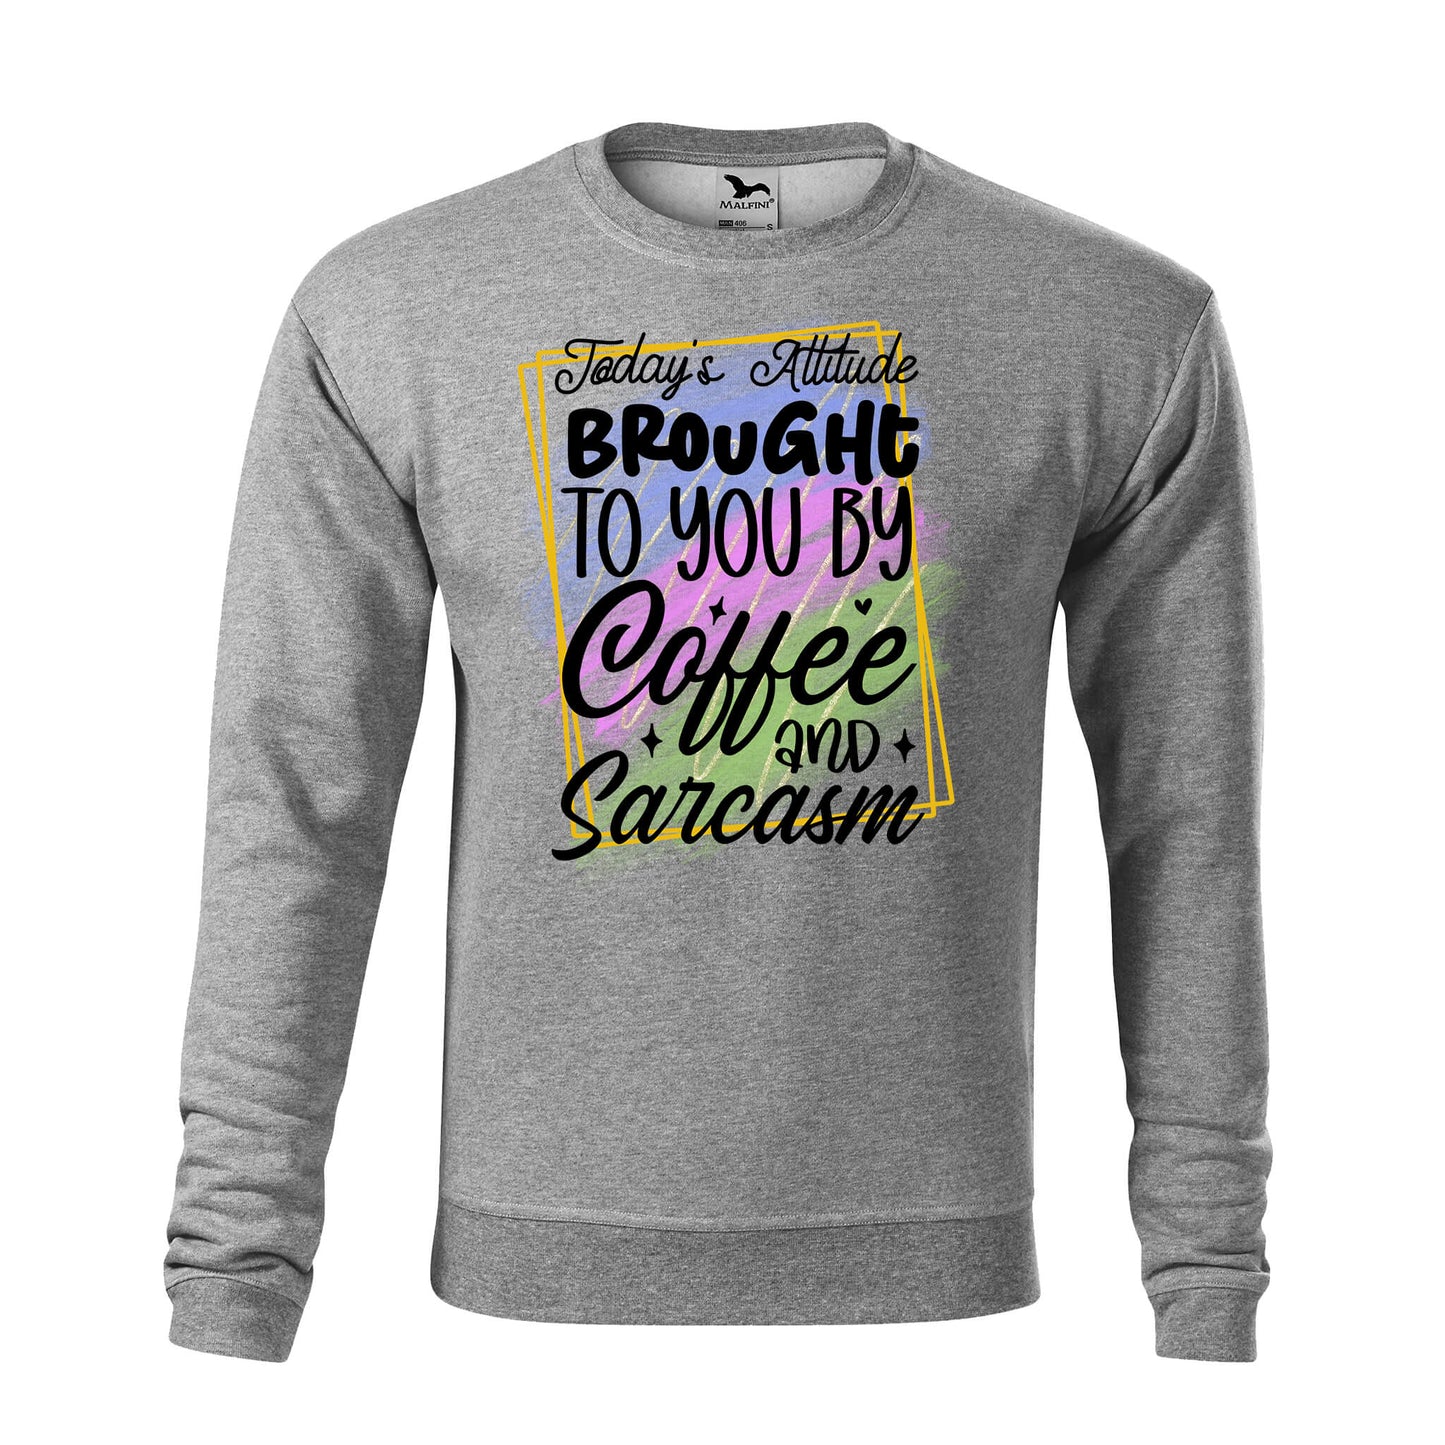 Todays attitude brought to you by sweatshirt - rvdesignprint